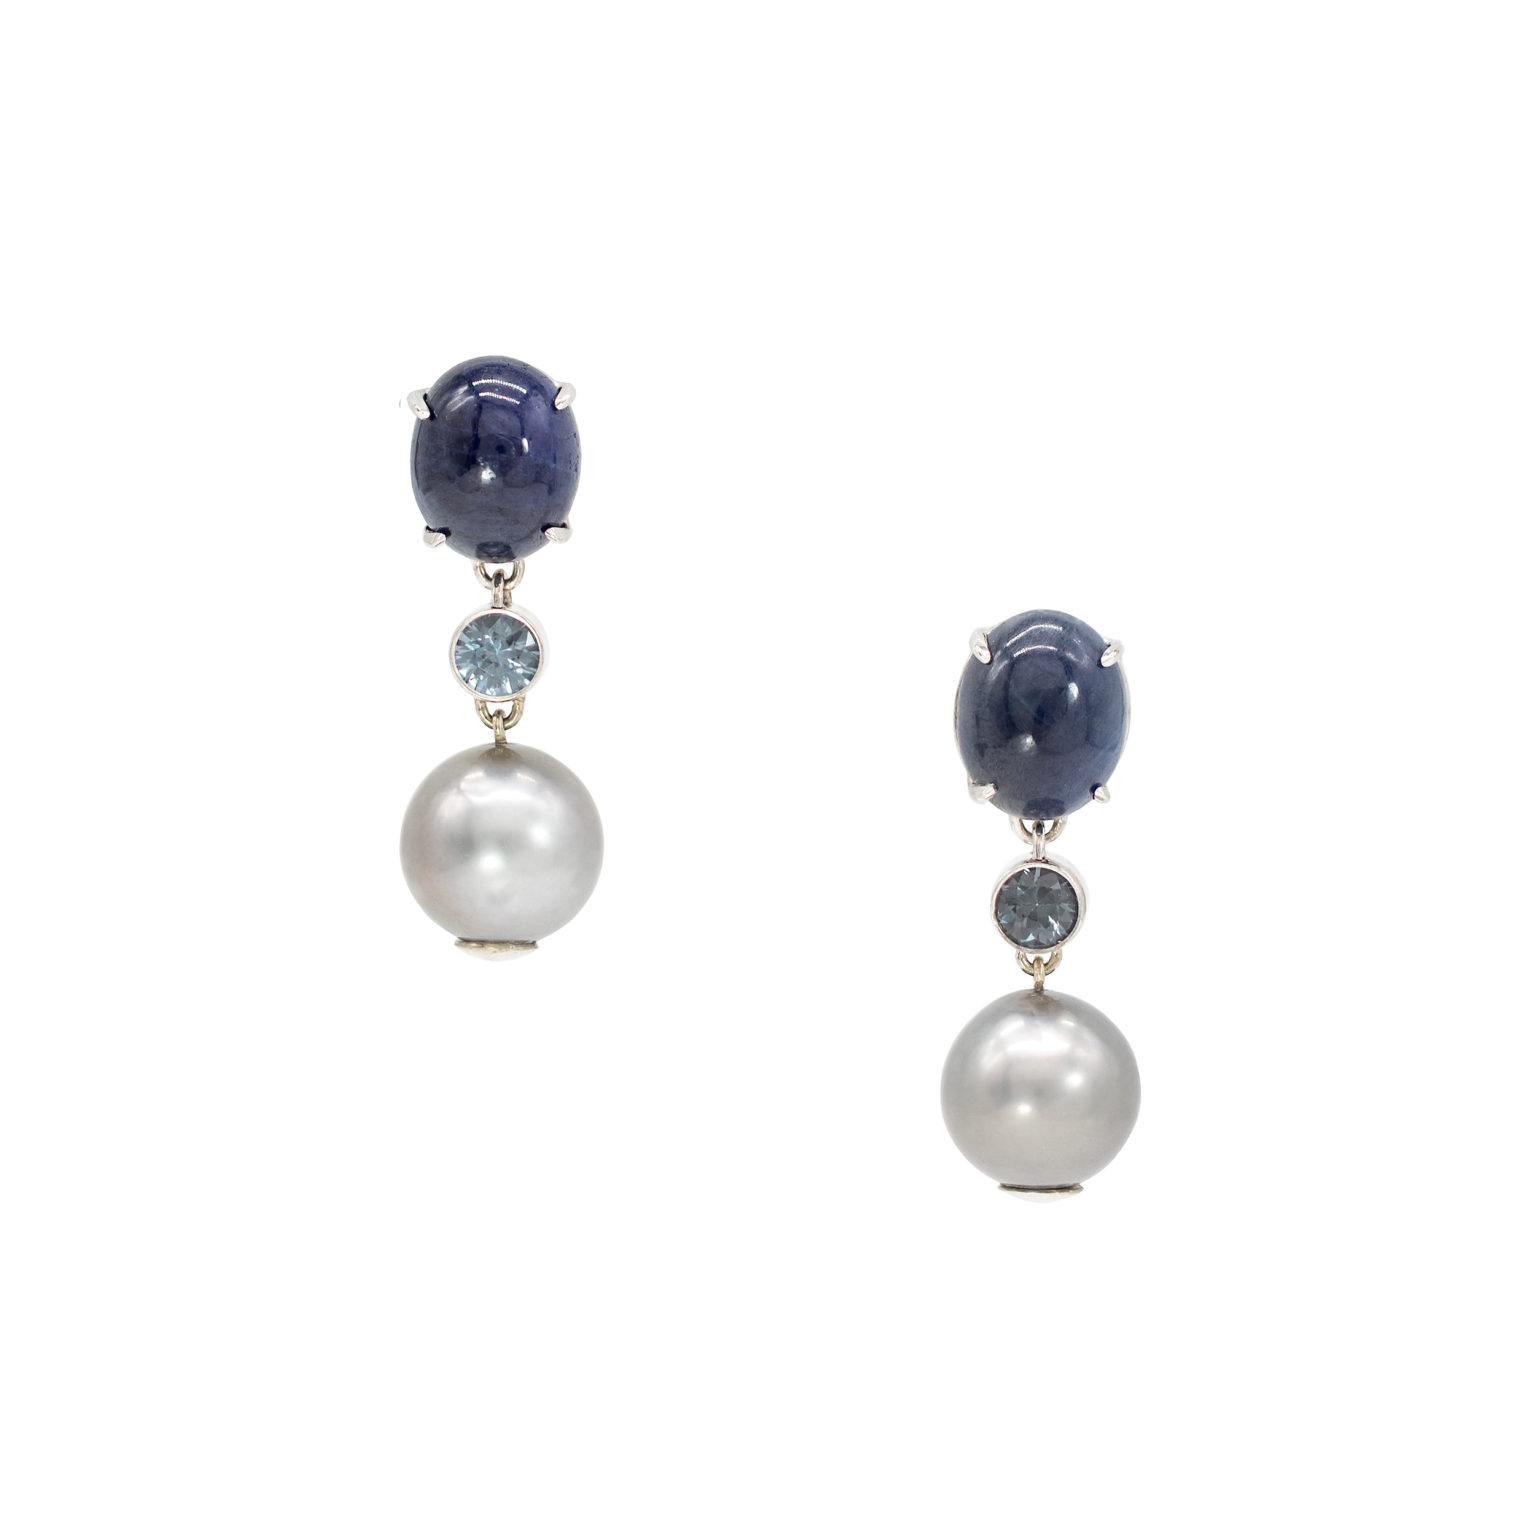 10.49 mm Tahitian Pearl Earrings with 10.75 Carats Sapphire and Spinel ...